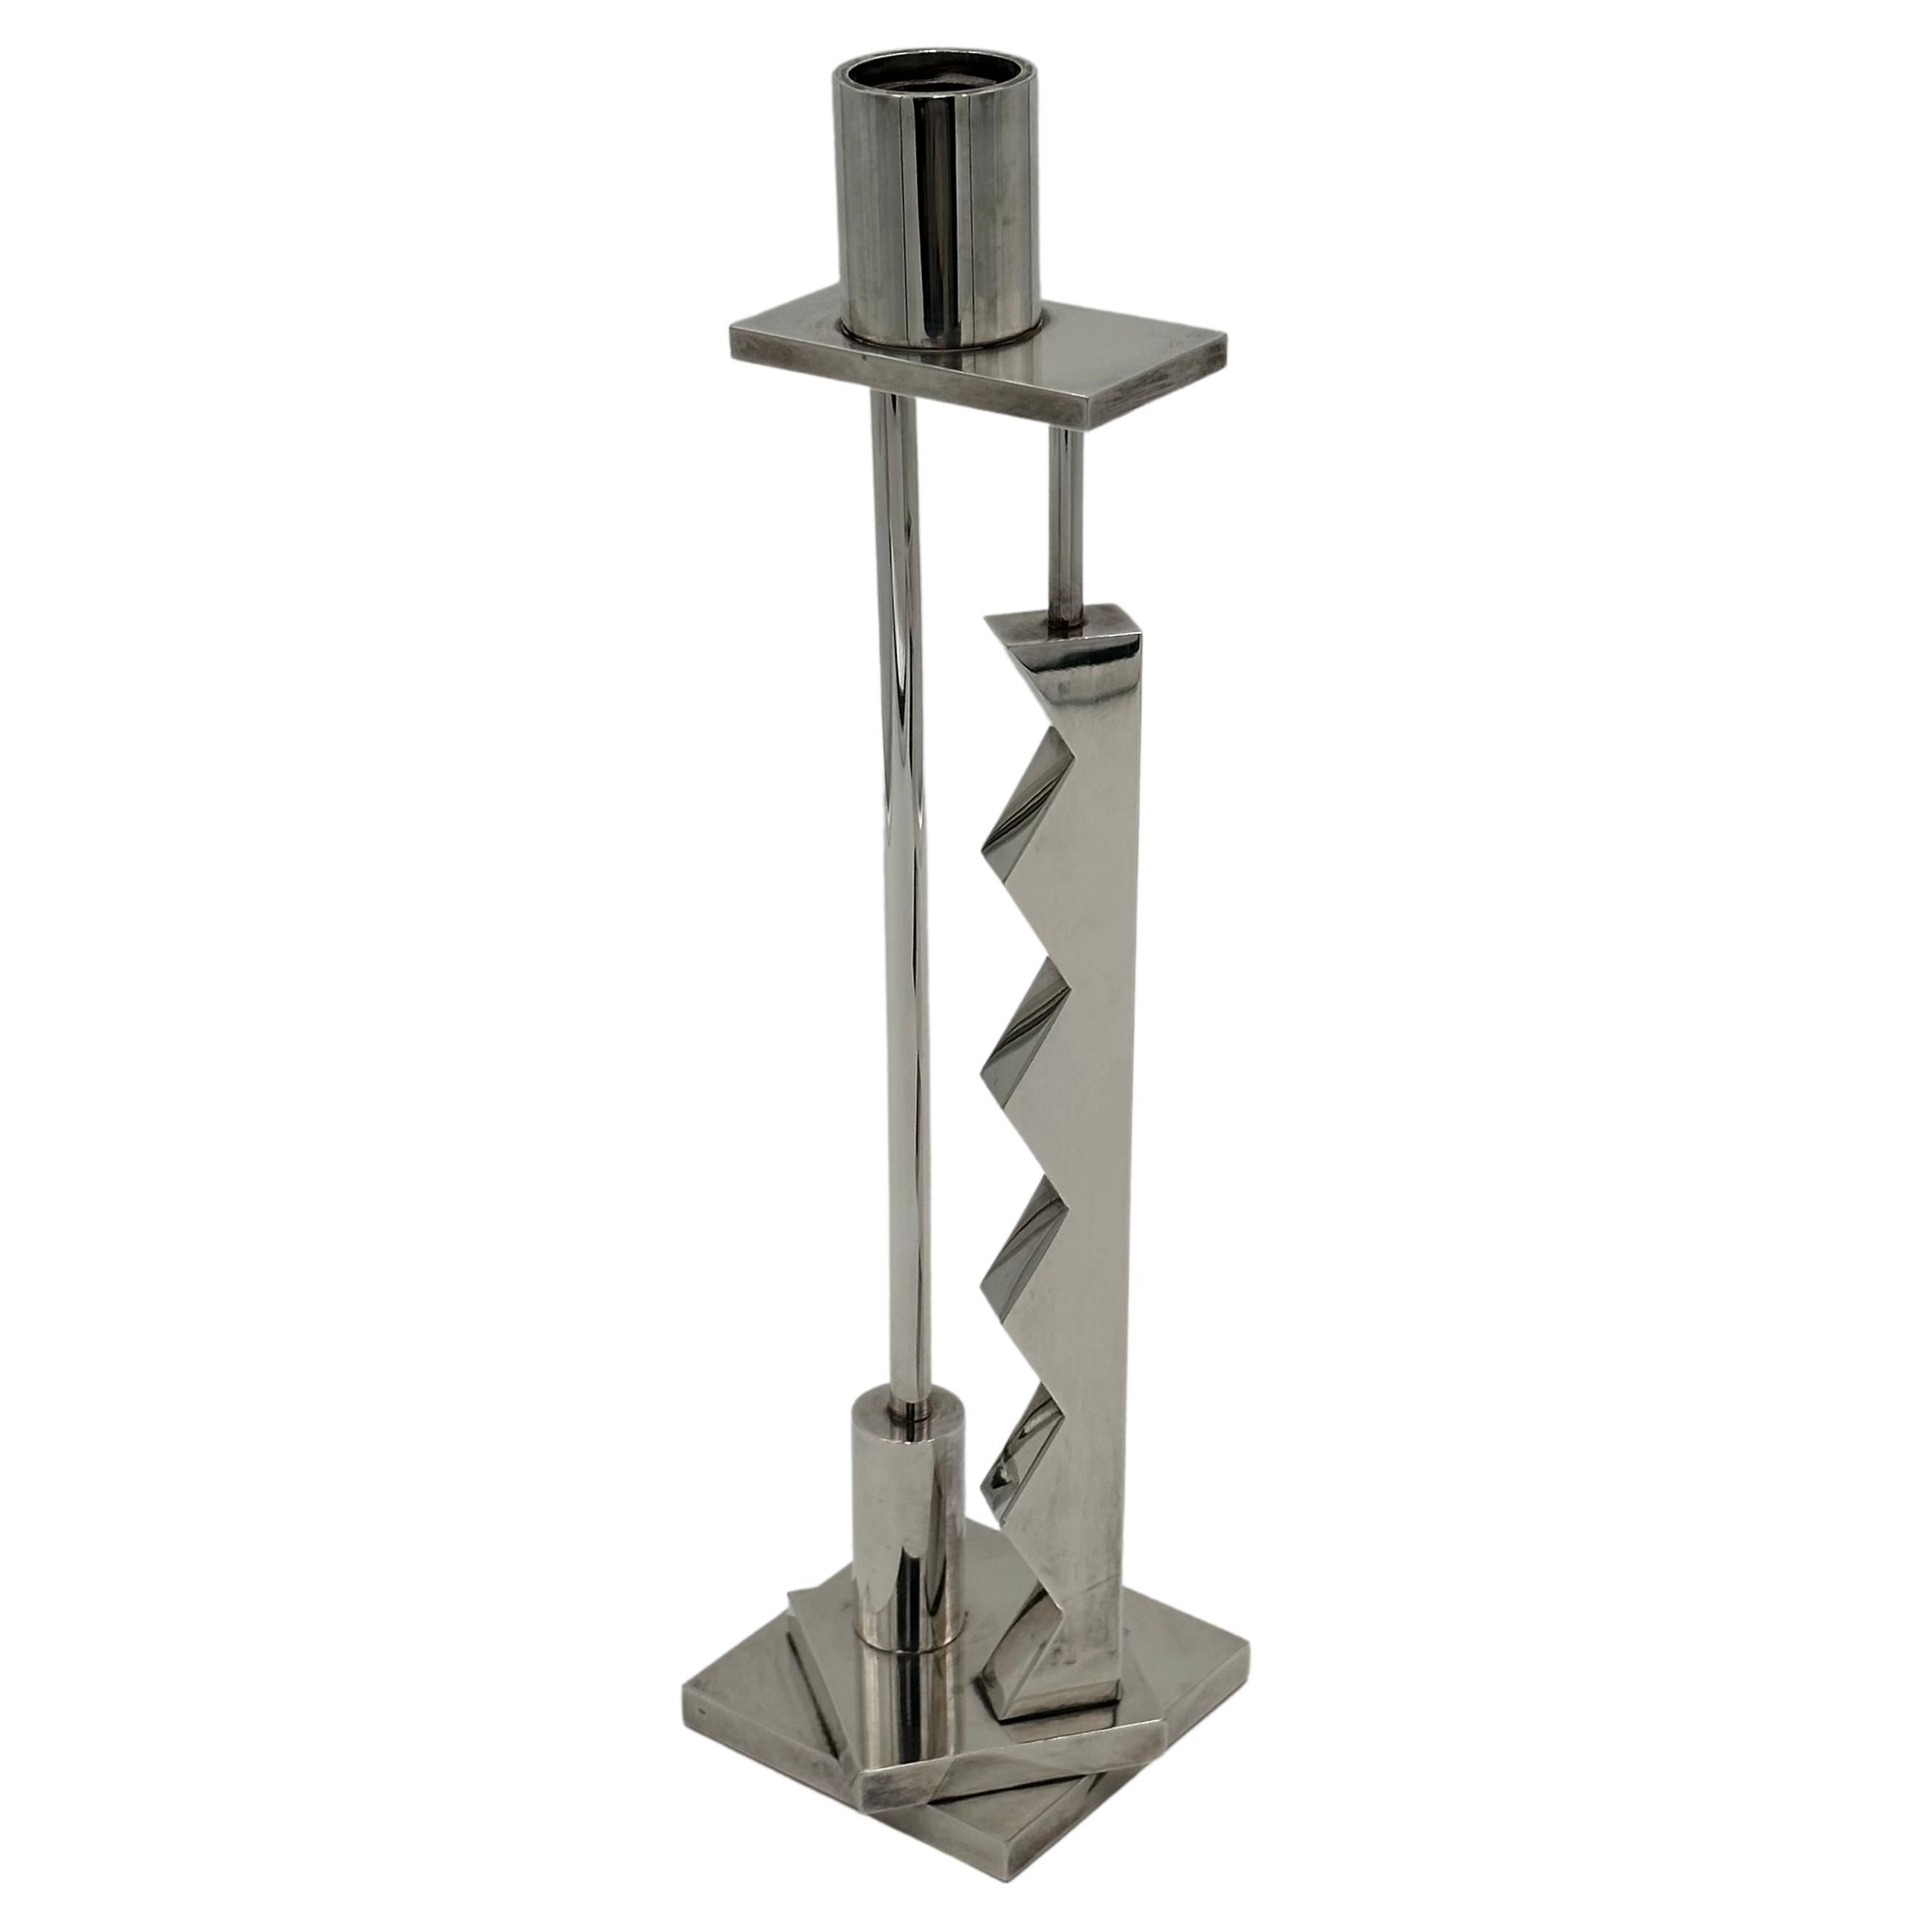 "Silvershade" Candlestick by Ettore Sottsass for Swid Powell